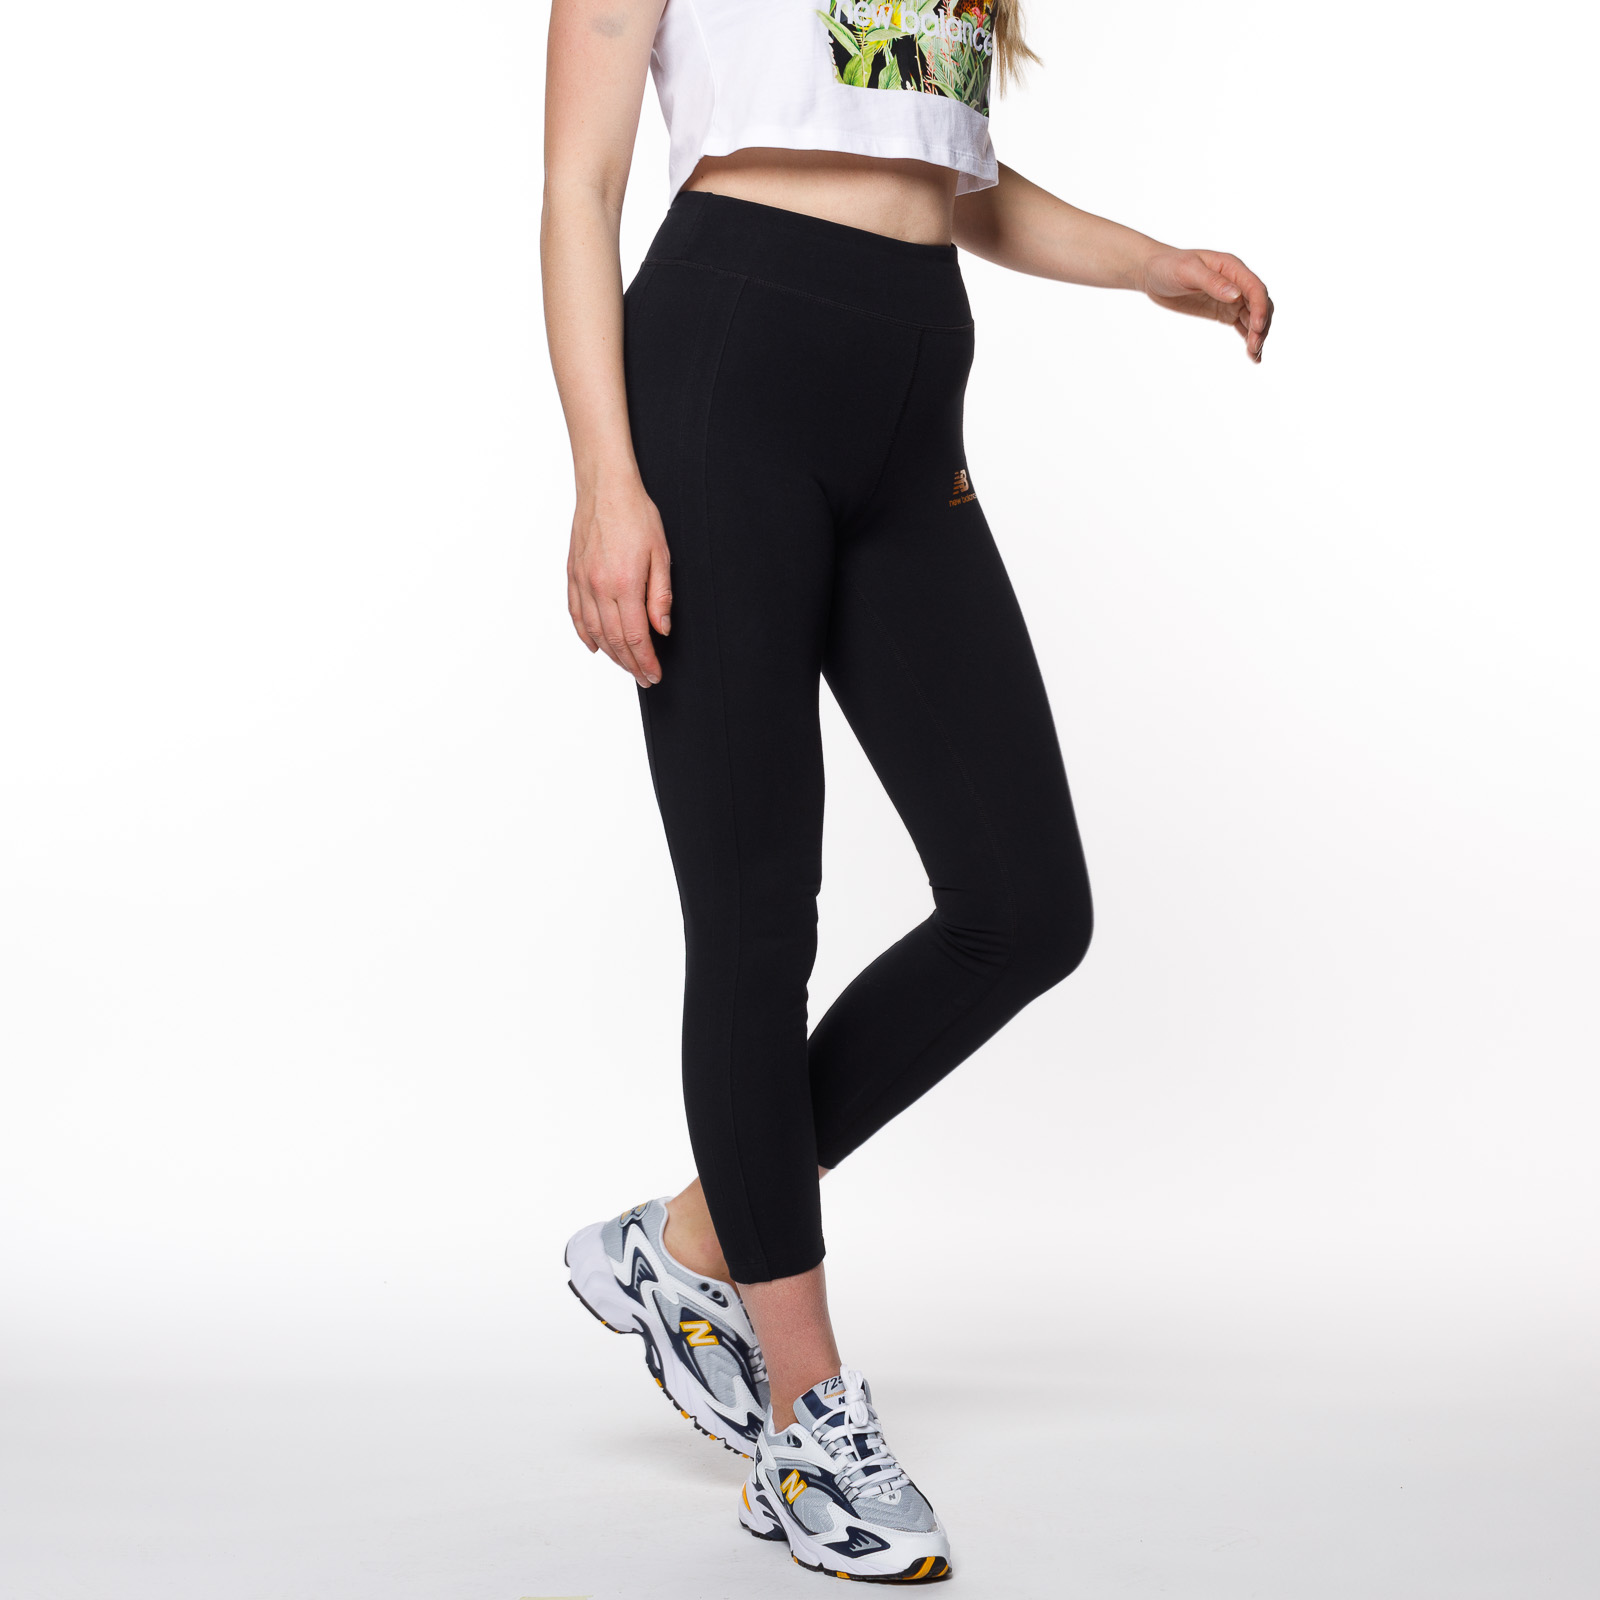 New Balance Relentless leggings in black with contrast waistband -  exclusive to ASOS | ASOS